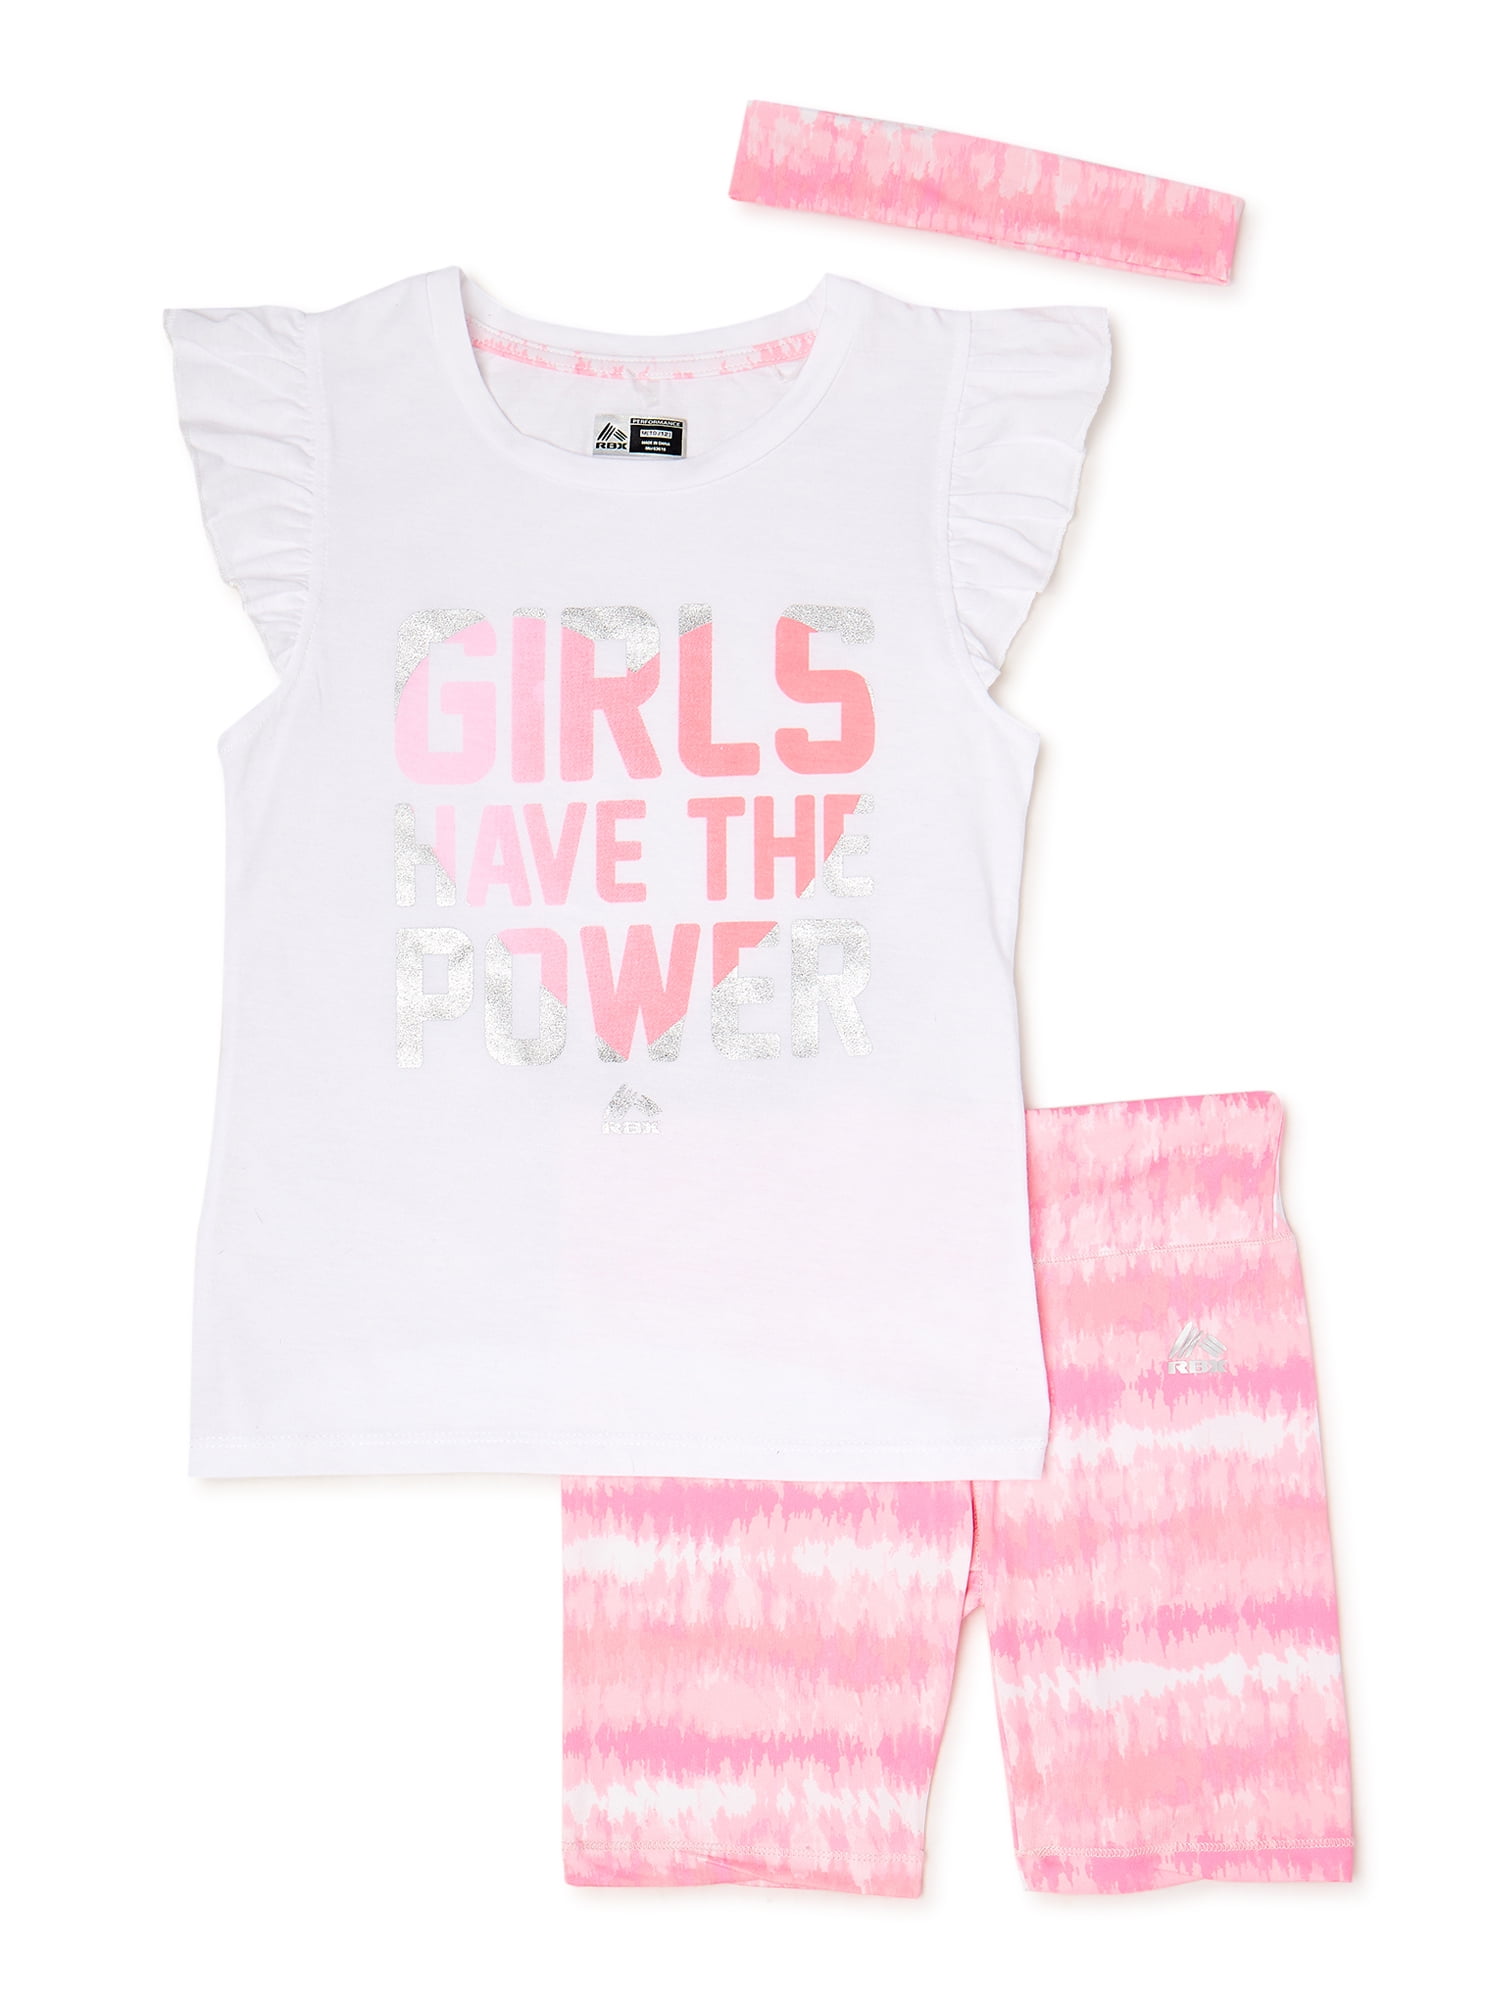 Girls Tie Dye T-Shirts Top Cycling Shorts Kids Tracksuit Co ord 2 Piece Set New 